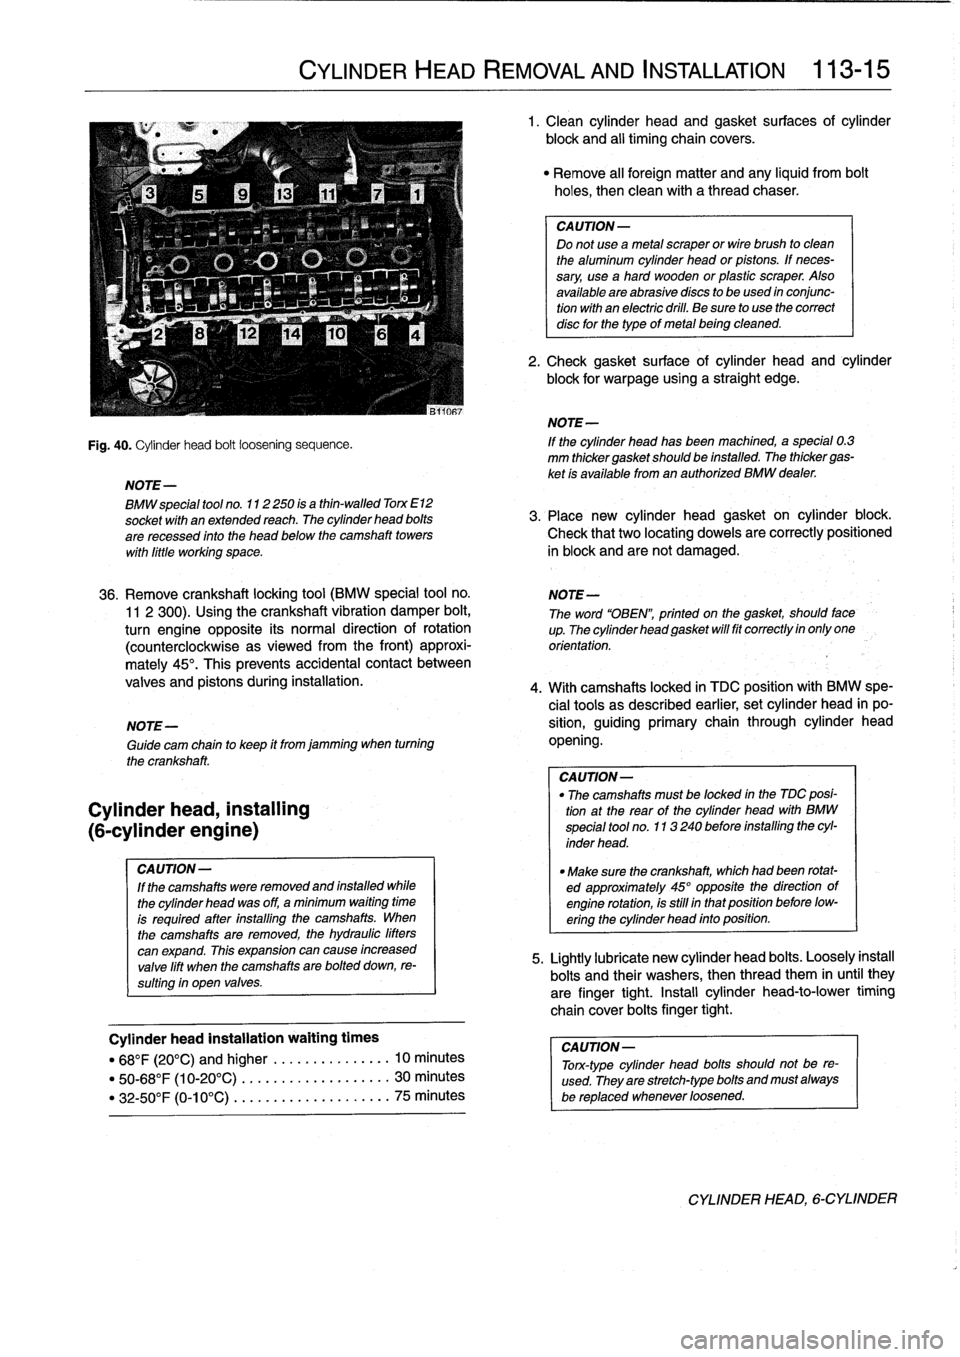 BMW M3 1994 E36 Workshop Manual 
NOTE-

Cylinder
head,
installing

(6-cylinder
engine)

CAUTION-

If
the
camshafts
were
removed
and
installed
while

the
cylinder
head
was
off,
a
minimum
waiting
time

is
required
after
ínstalling
th